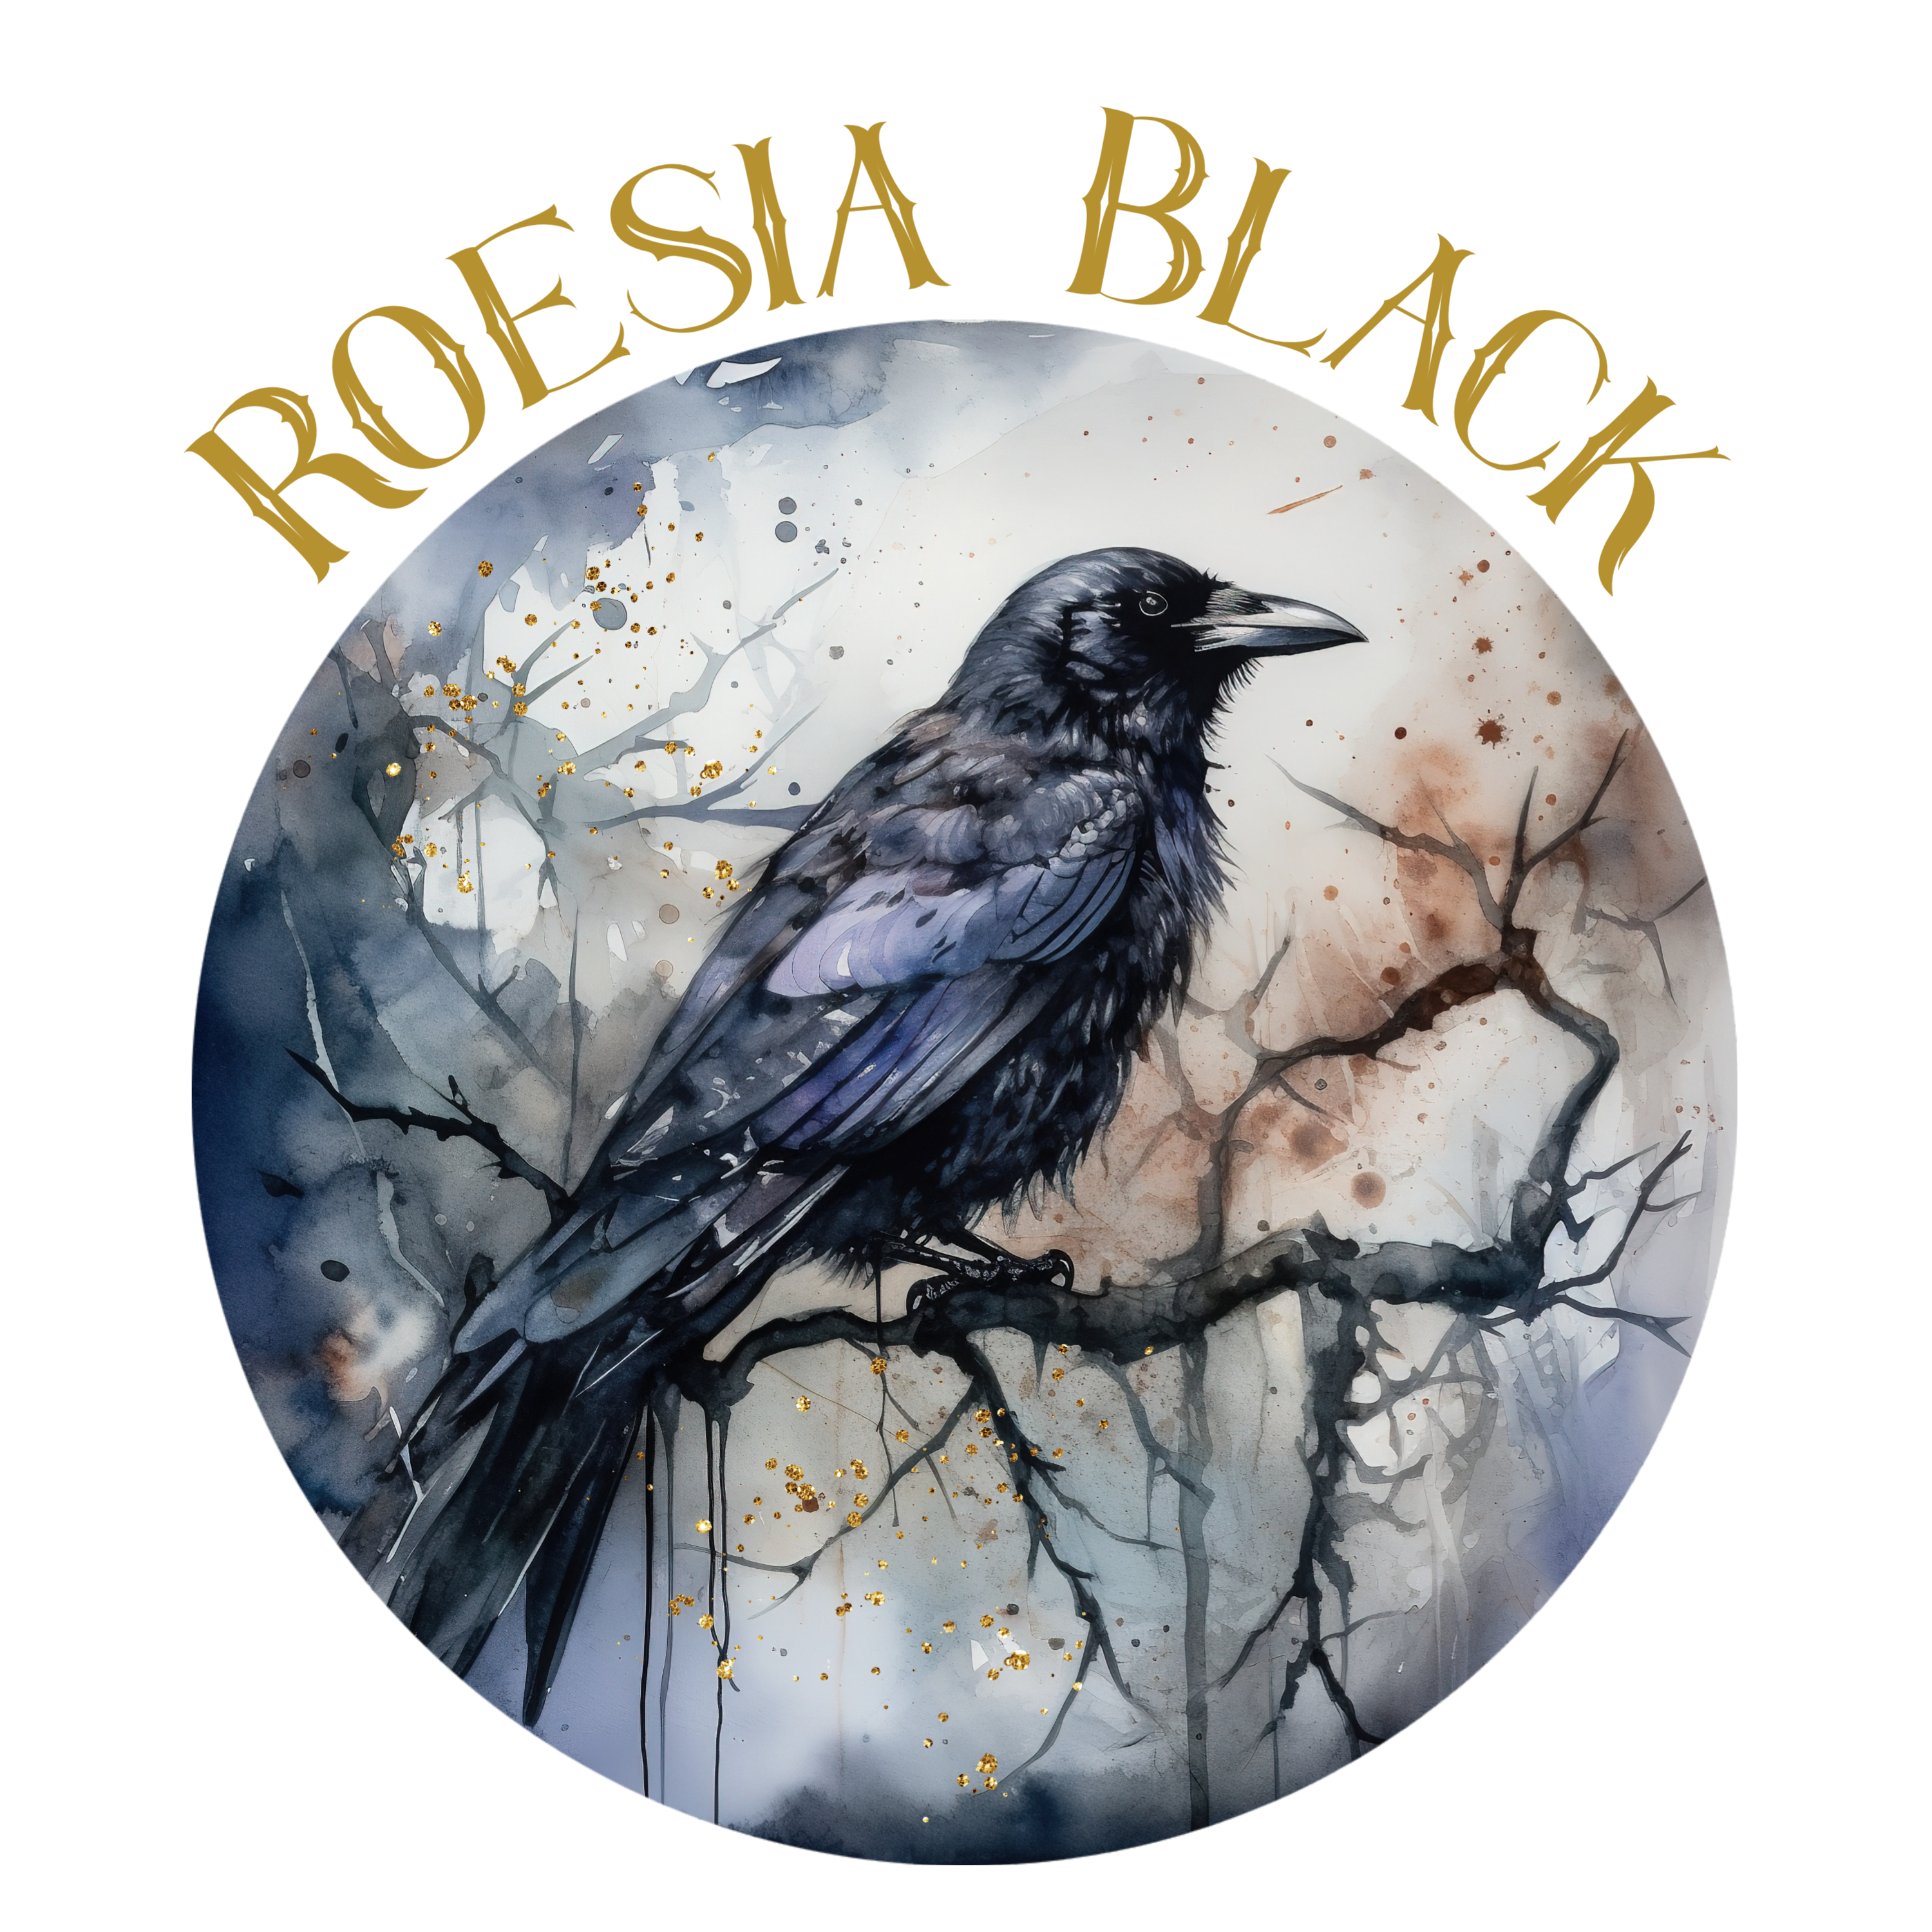 Roesia Black Cover